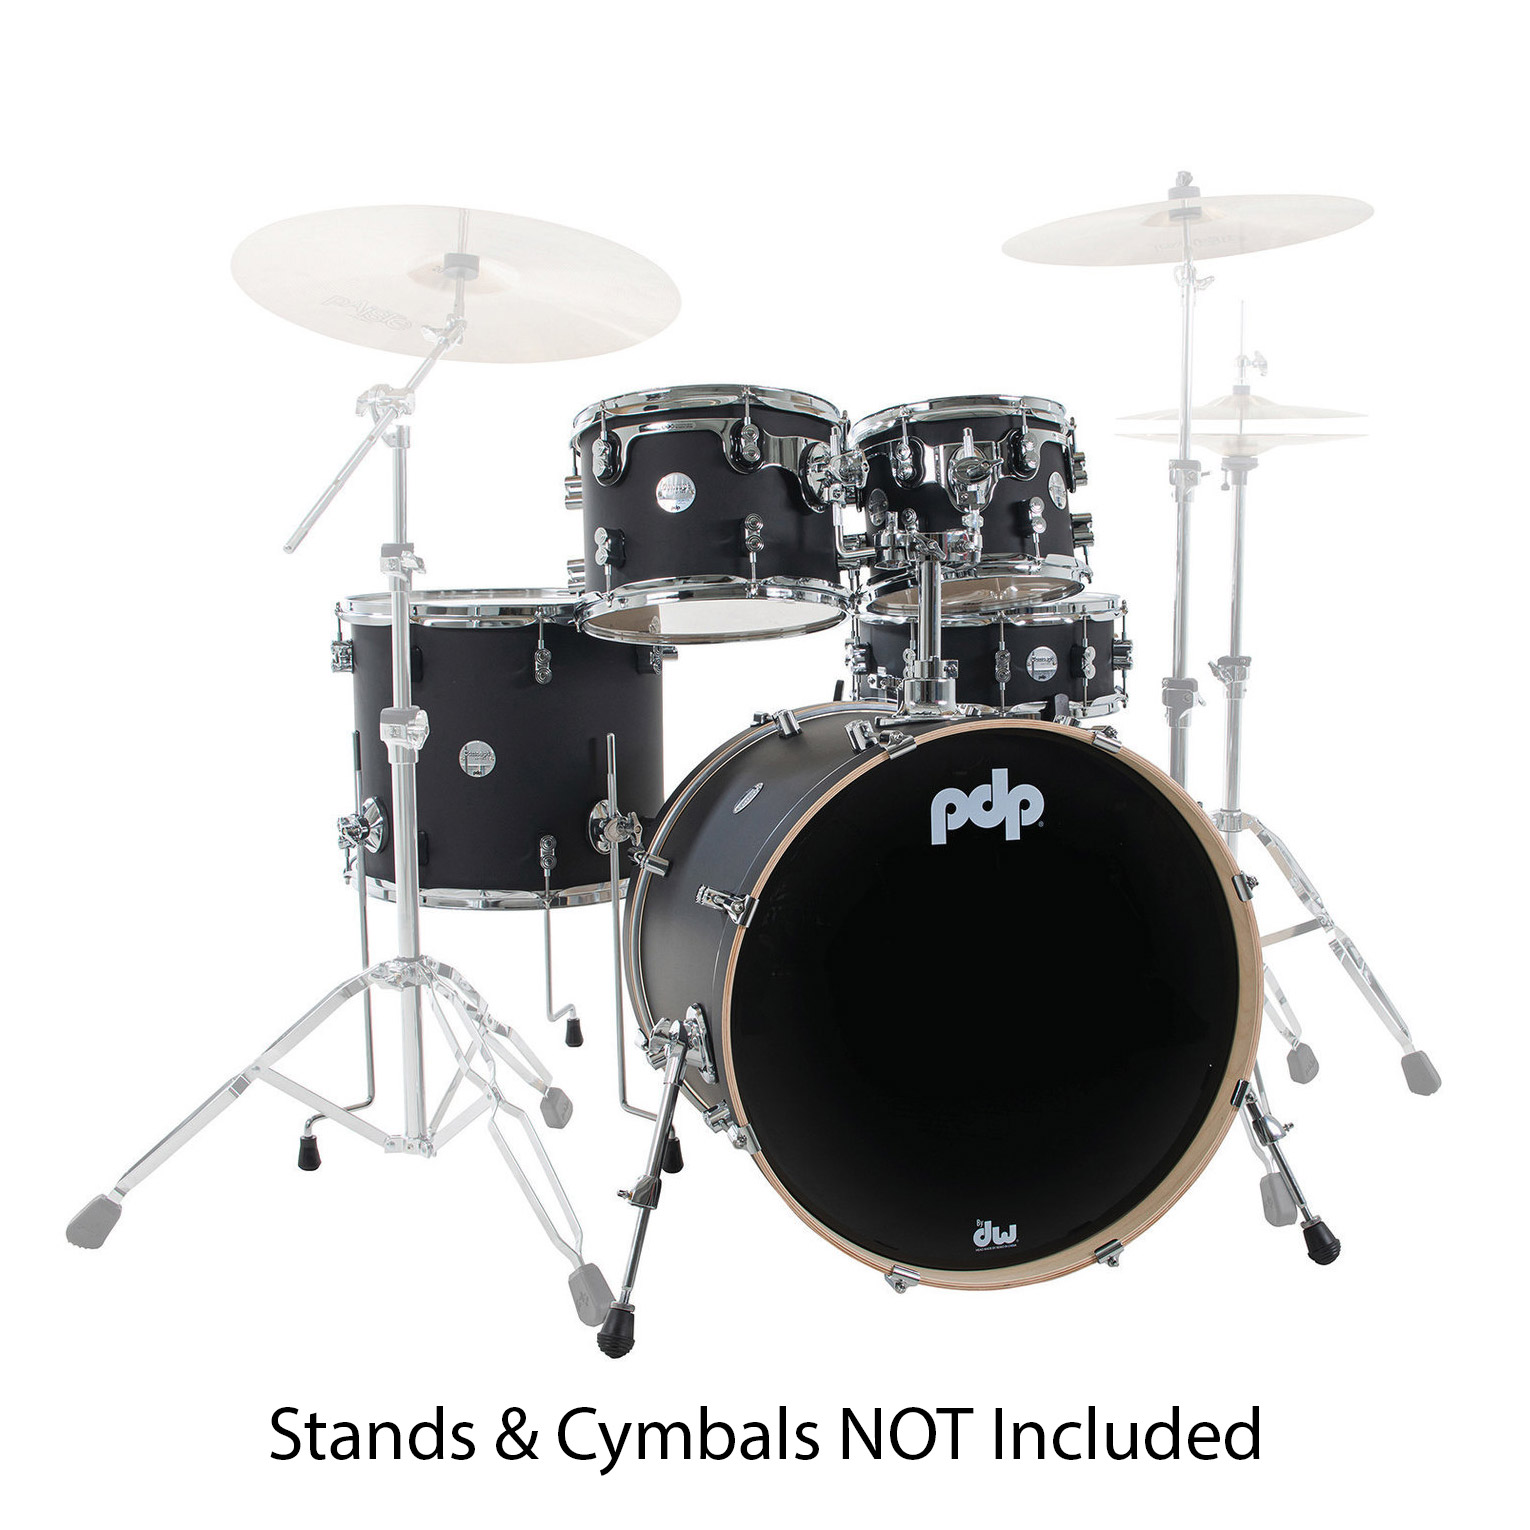 PDP Concept Maple CM5 Series 22 Inch Shell Pack in Satin Black (PRE-OWNED)